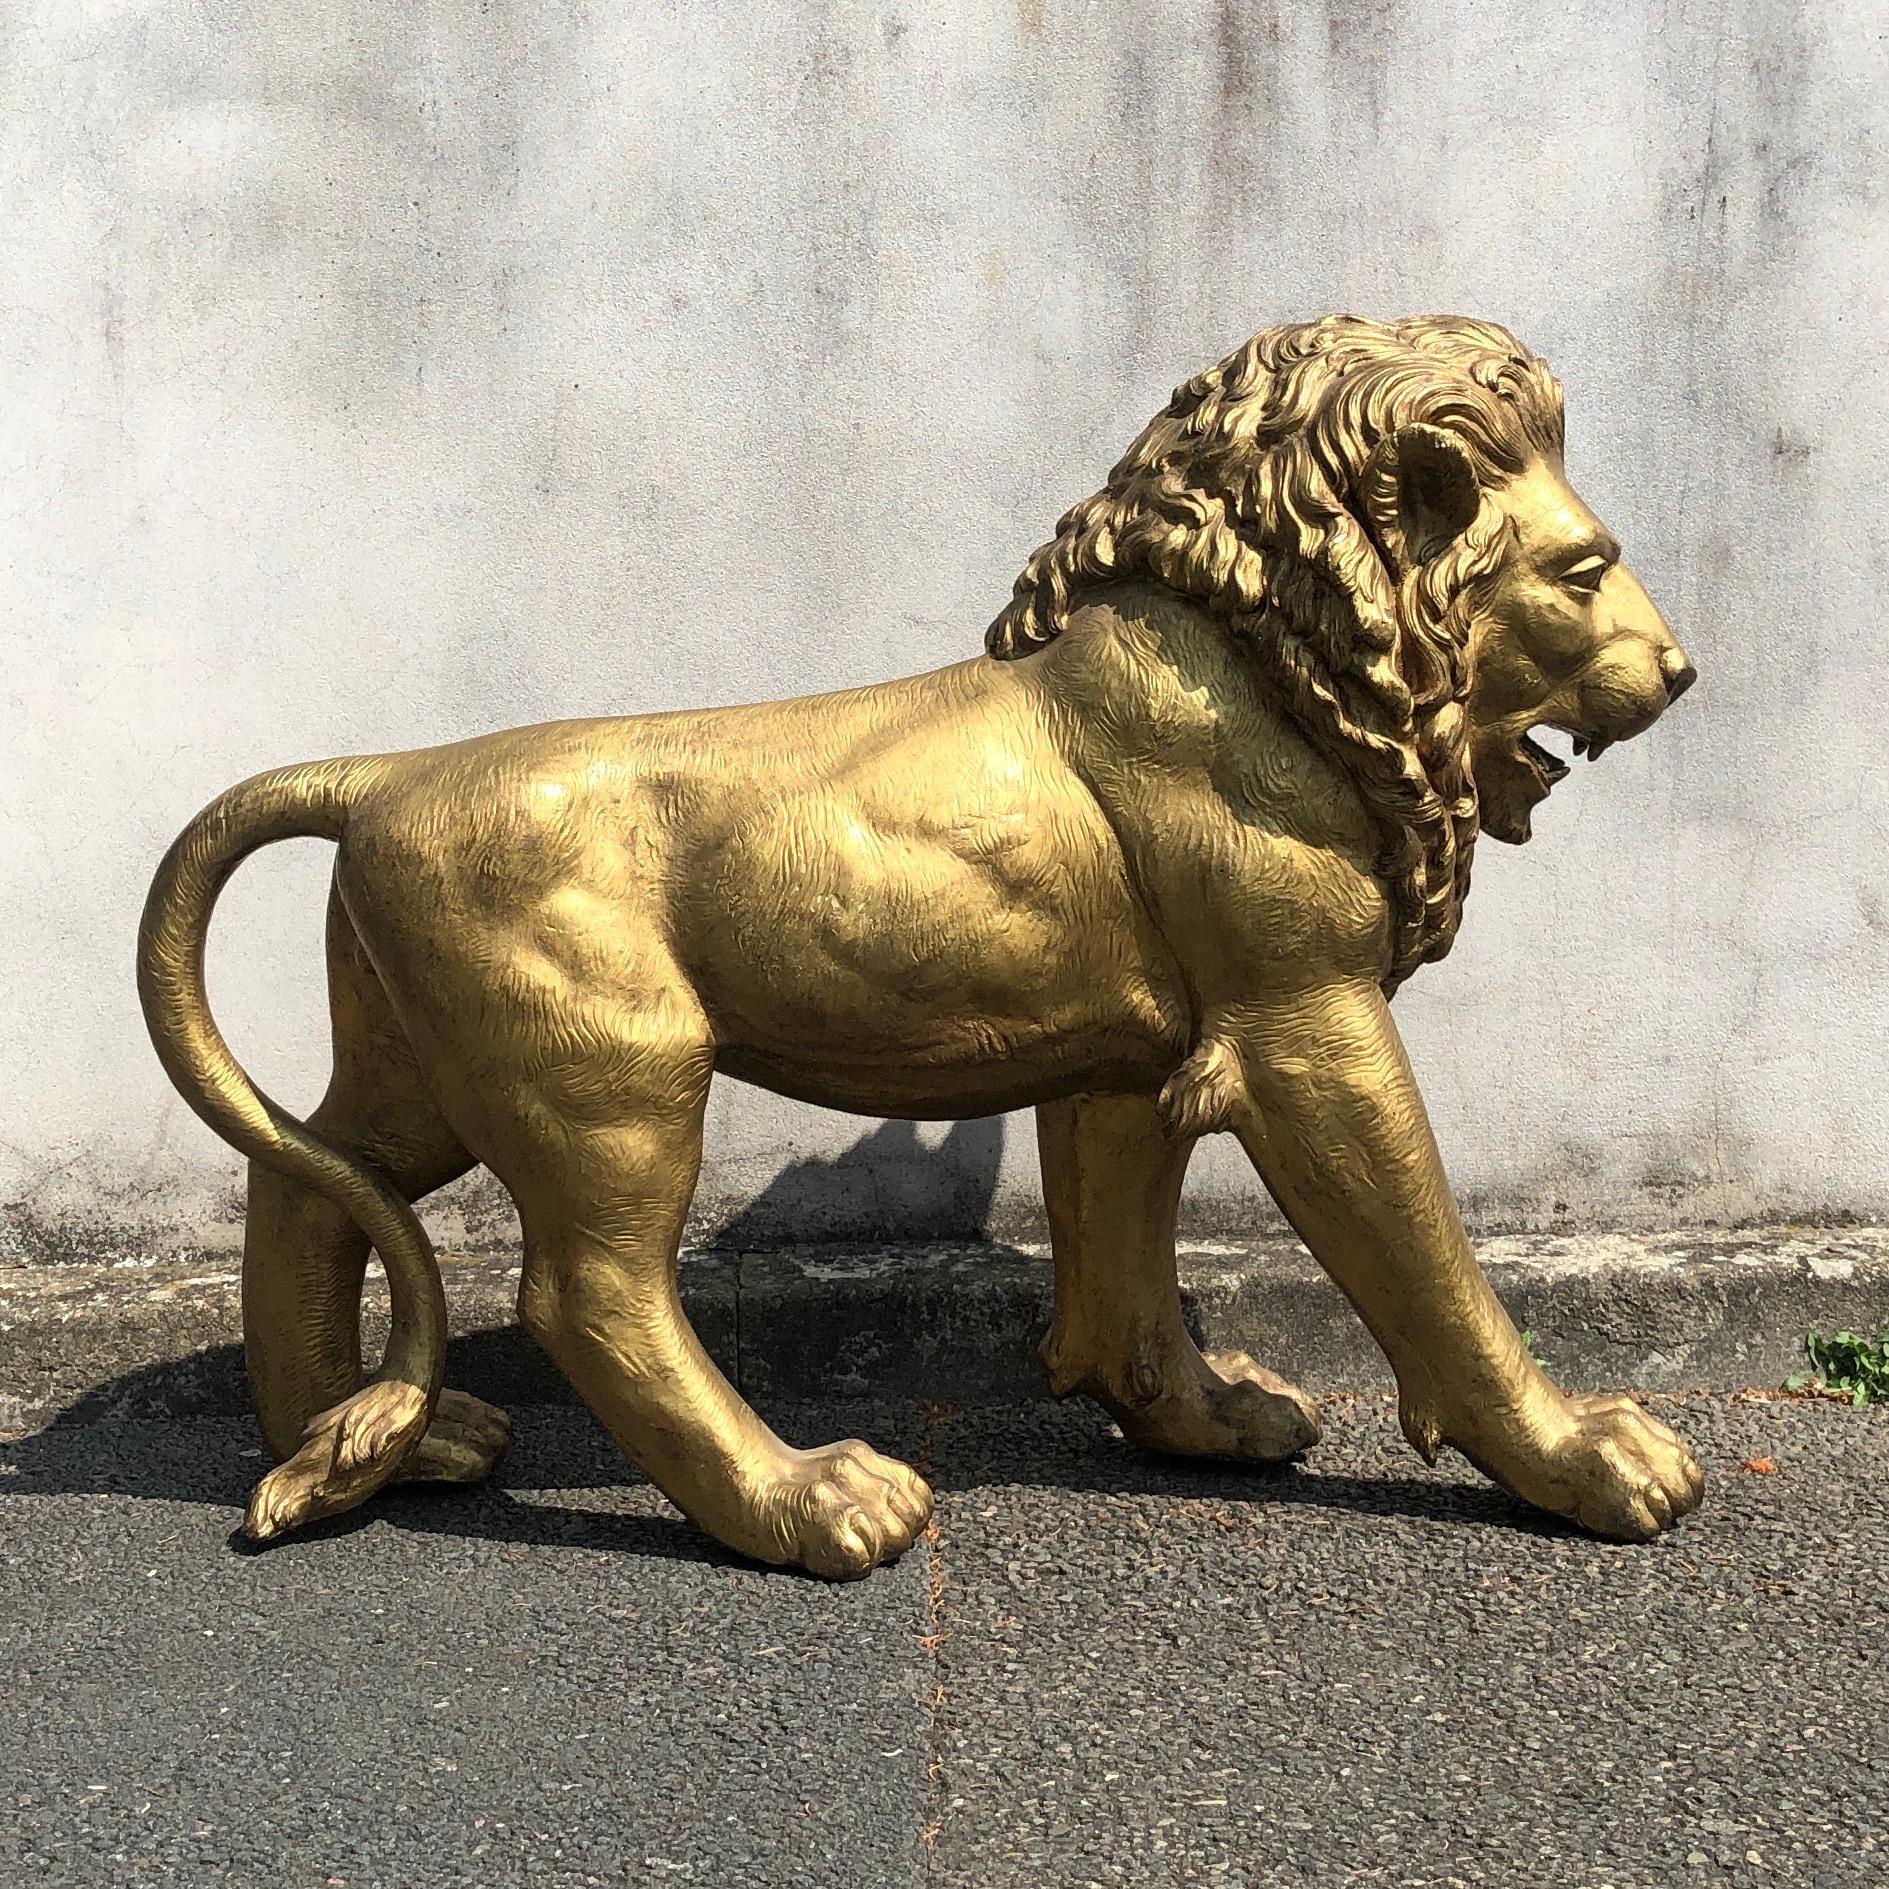 Golden bronze animal sculpture representing a lion from Paris from 1940s

Gold lacquered golden bronze lion, from Paris from mid-20th century. Please note details such as the face, the foot and the tail. They are finely engraved and worked to give